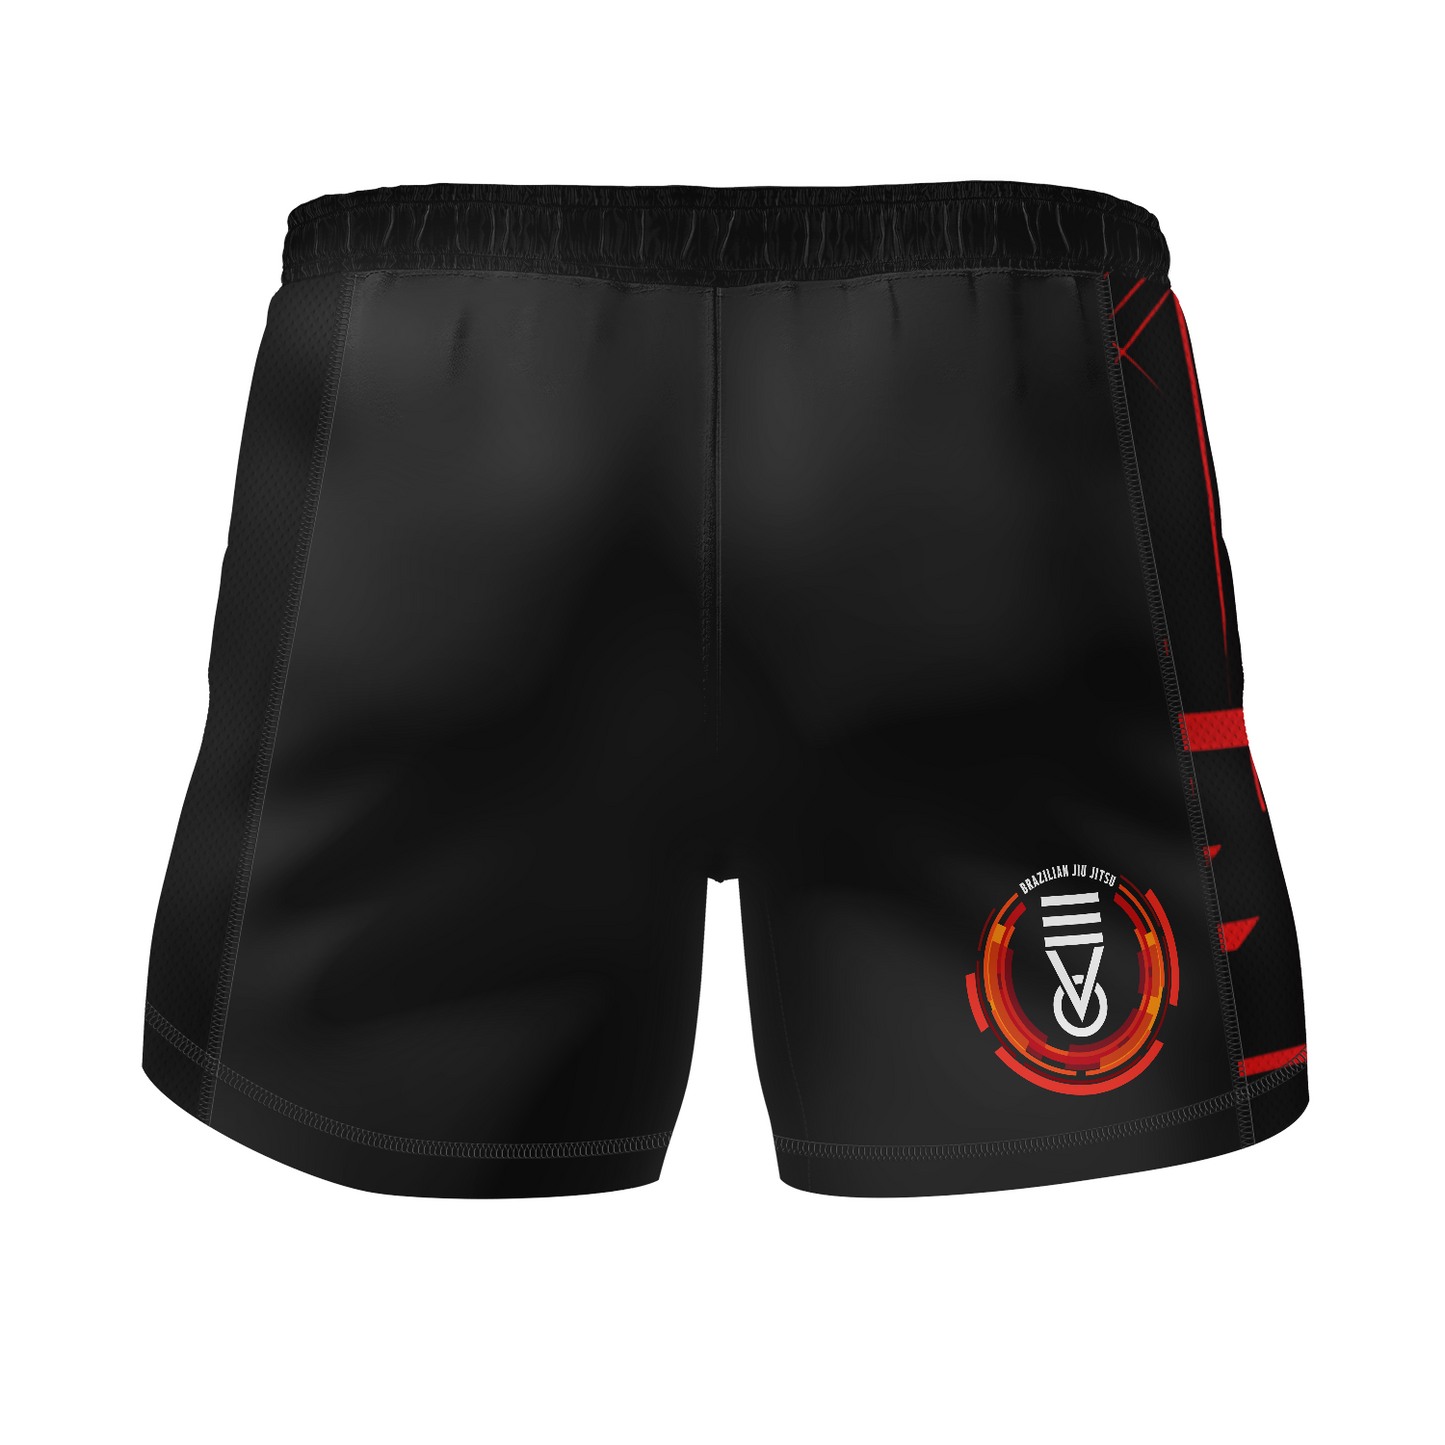 Evo BJJ fight shorts Ranked, black and red